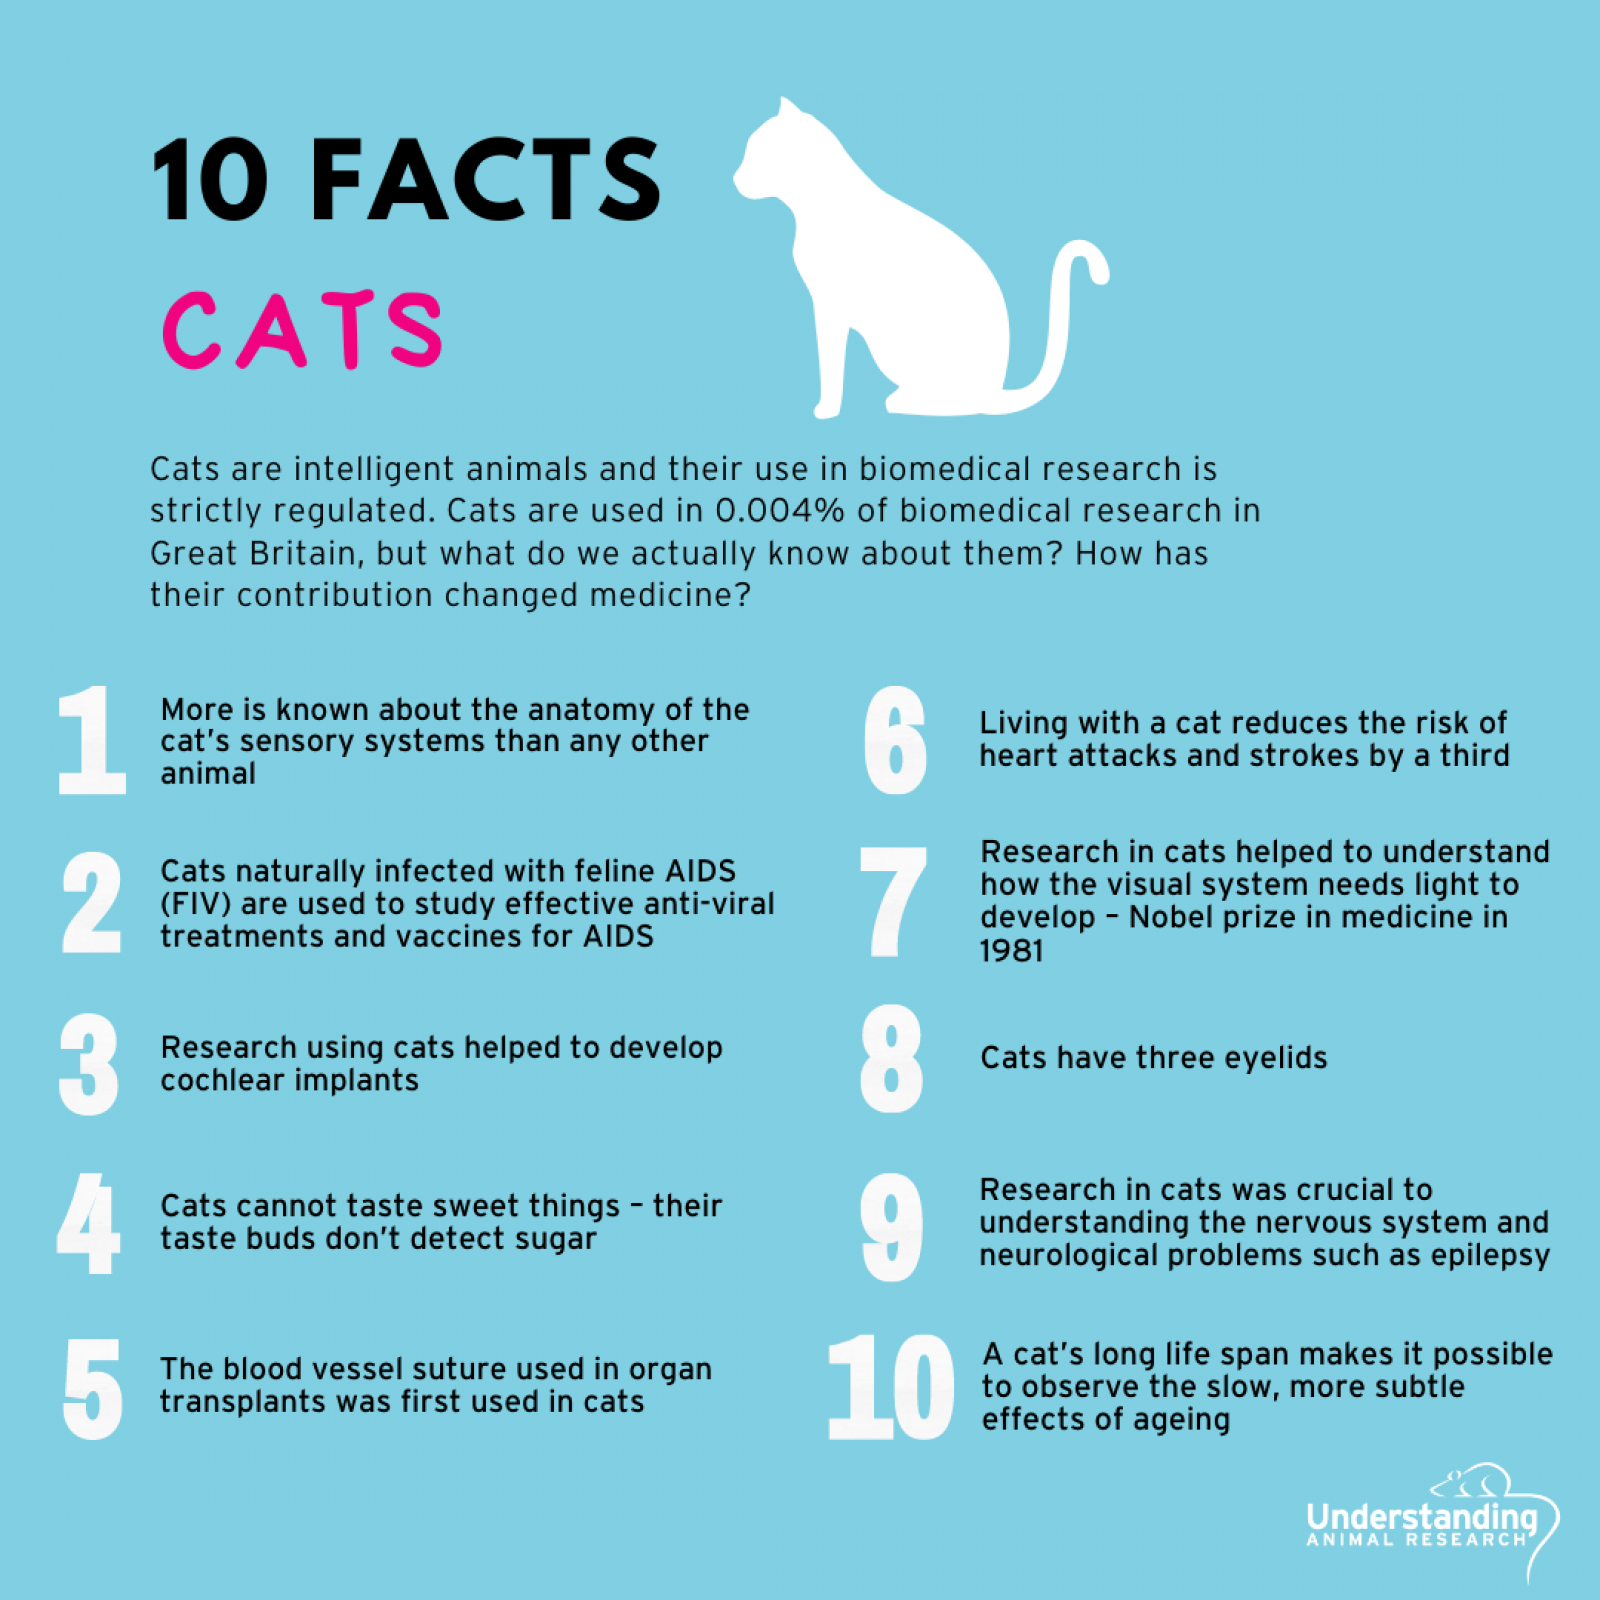 10 facts about cats